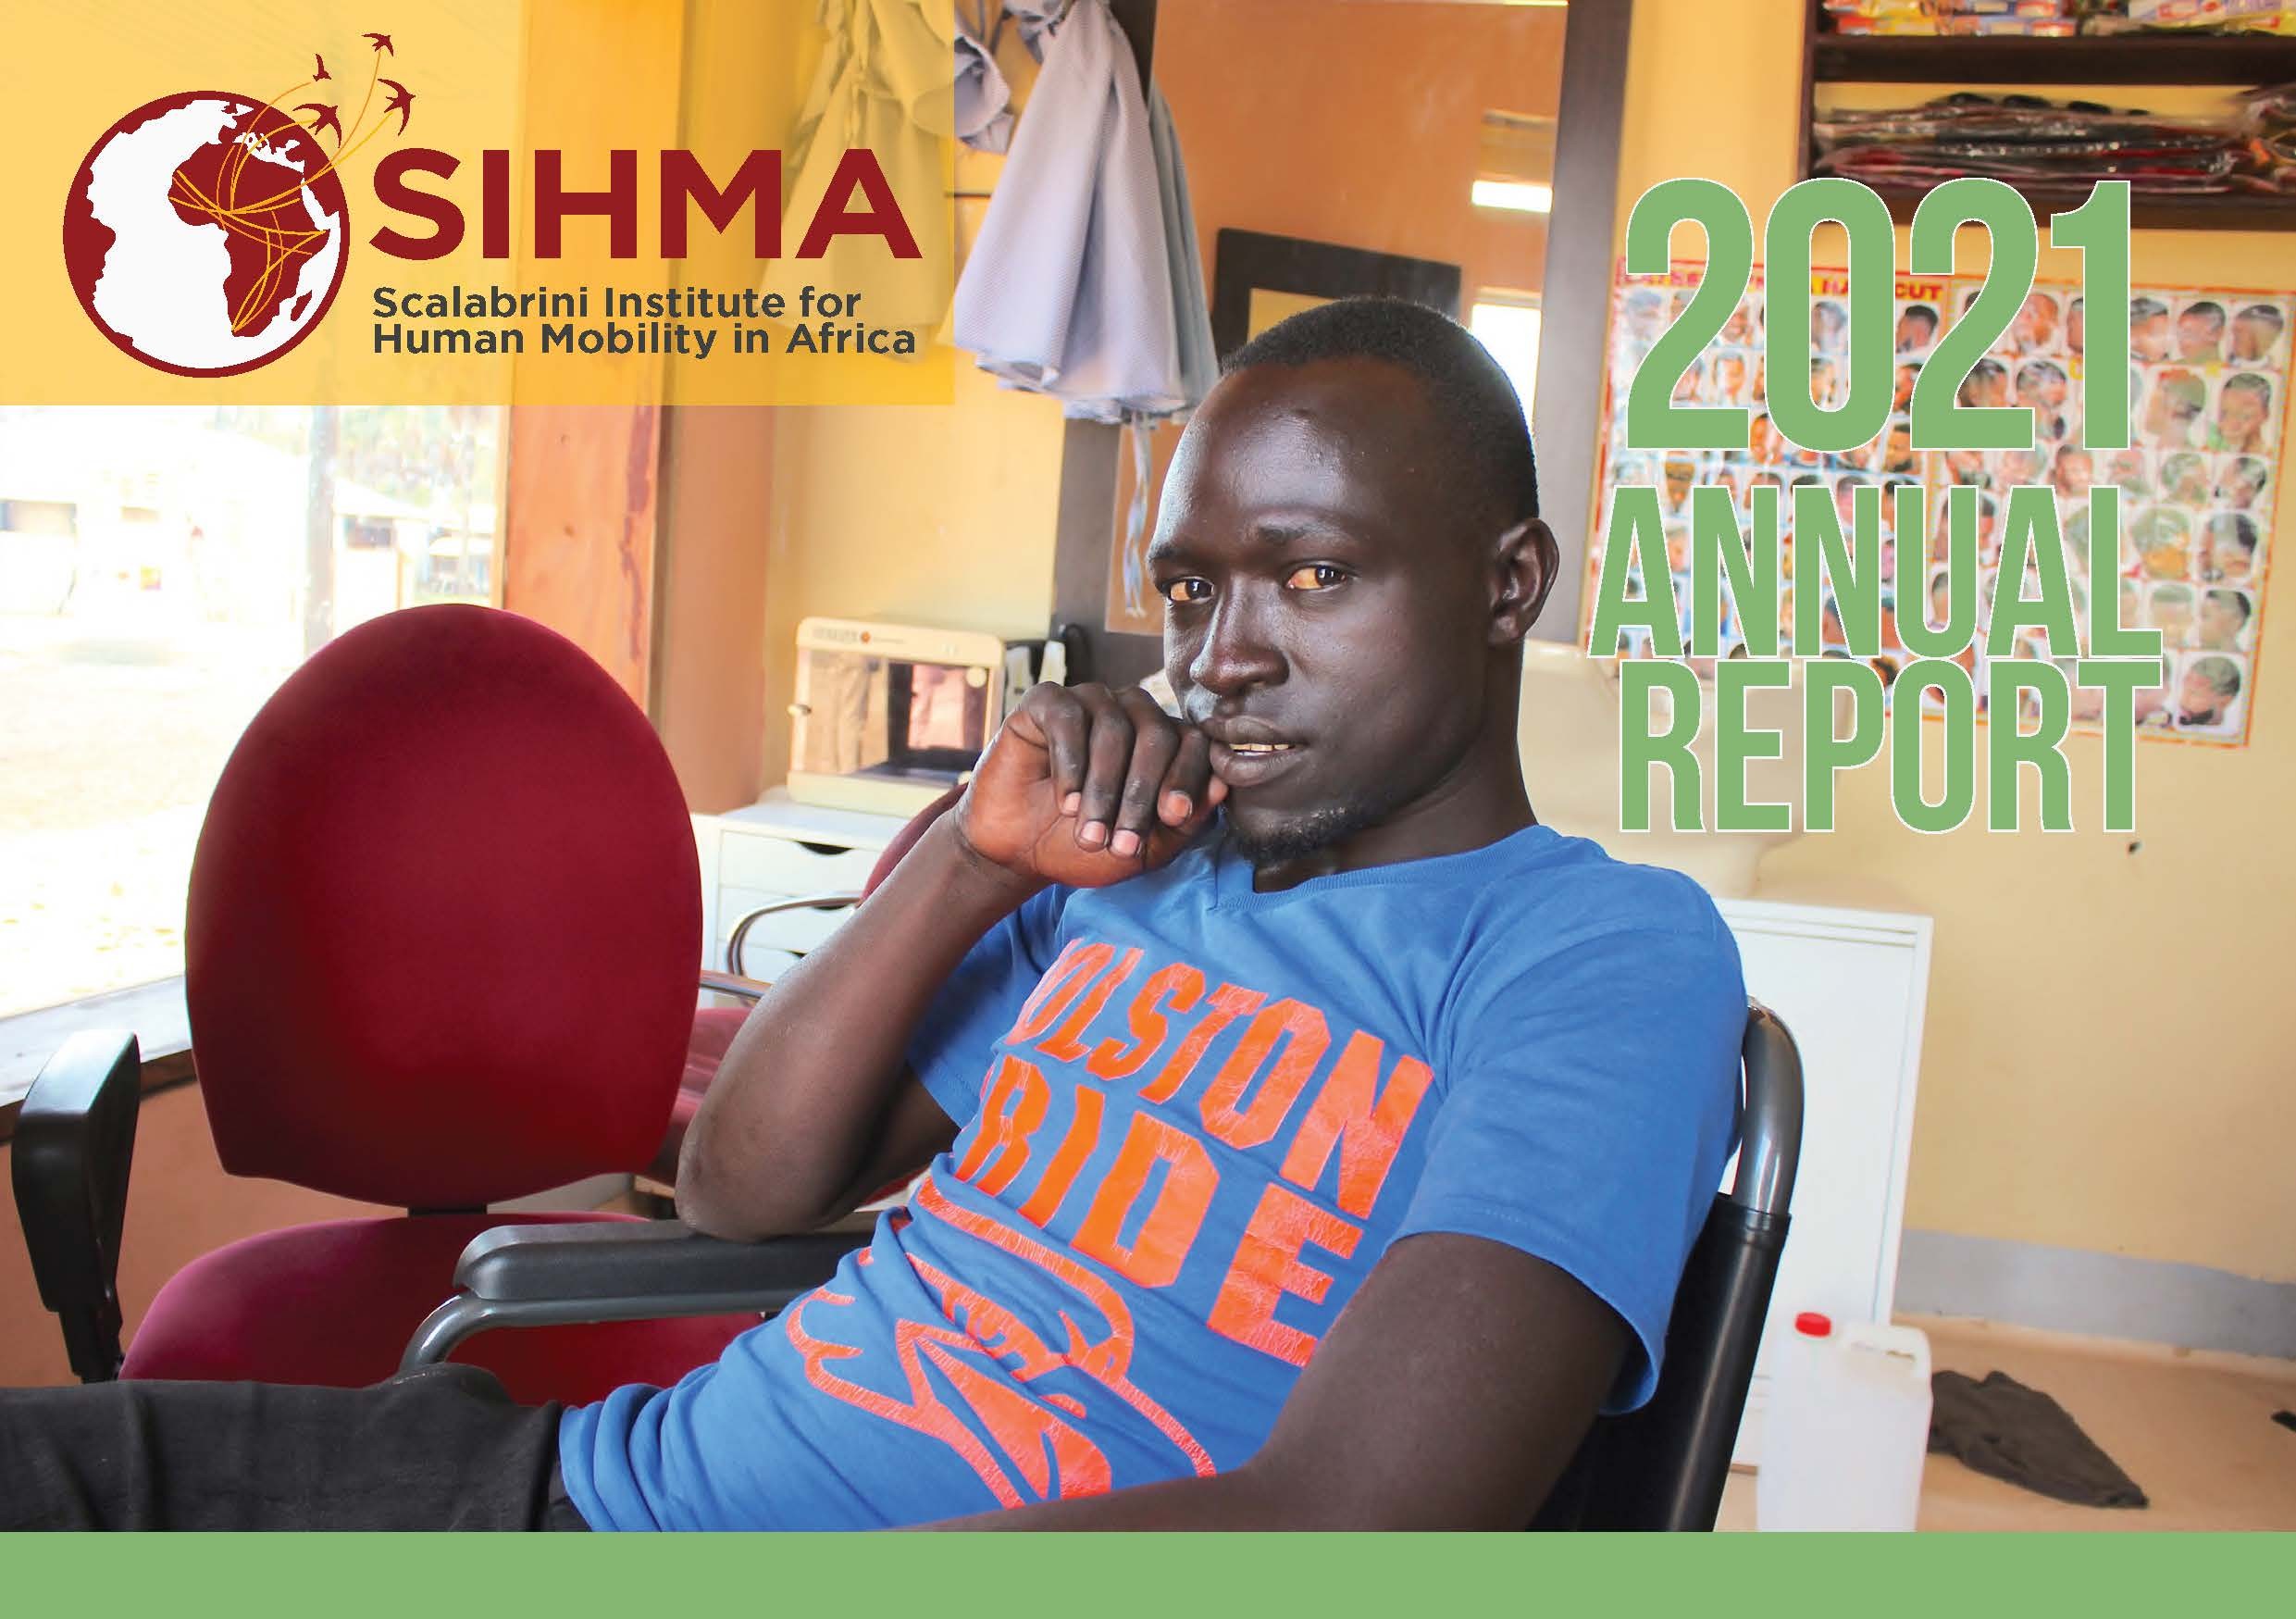 https://sihma.org.za/photos/shares/SIHMA Annual Report 2021 Cover.jpg